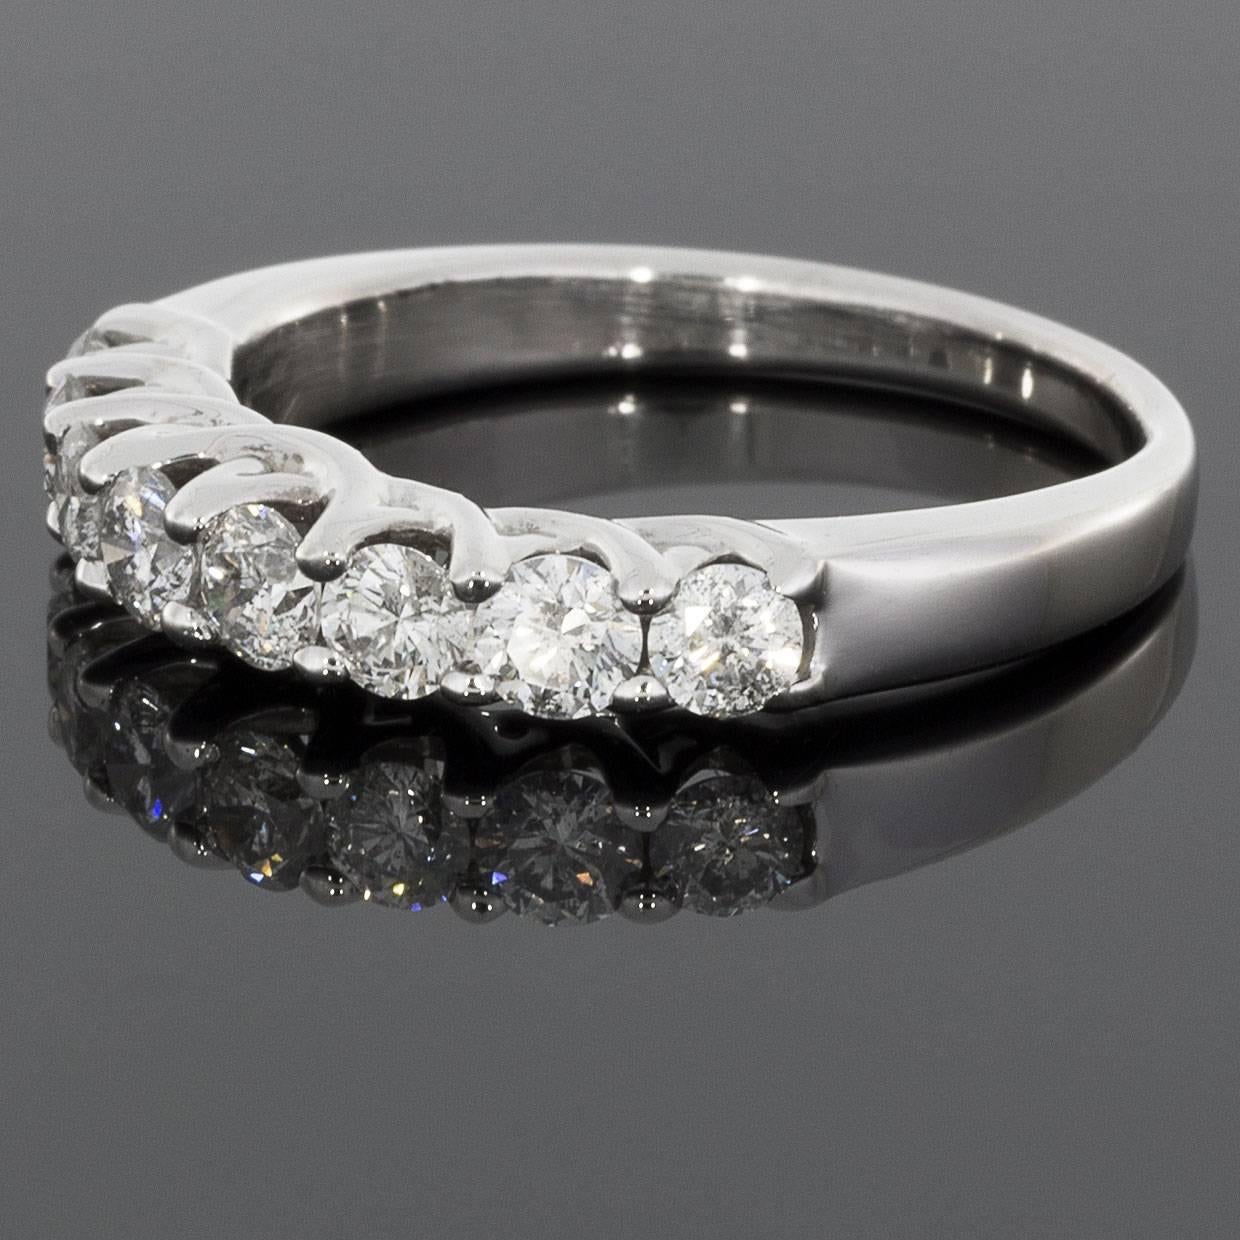 This classic diamond band would make a wonderful wedding band or anniversary ring. The ring is comprised of 14 karat white gold & features 8 round brilliant cut diamonds that have a combined total weight of 1.20 carats. The diamonds are HI/SI in